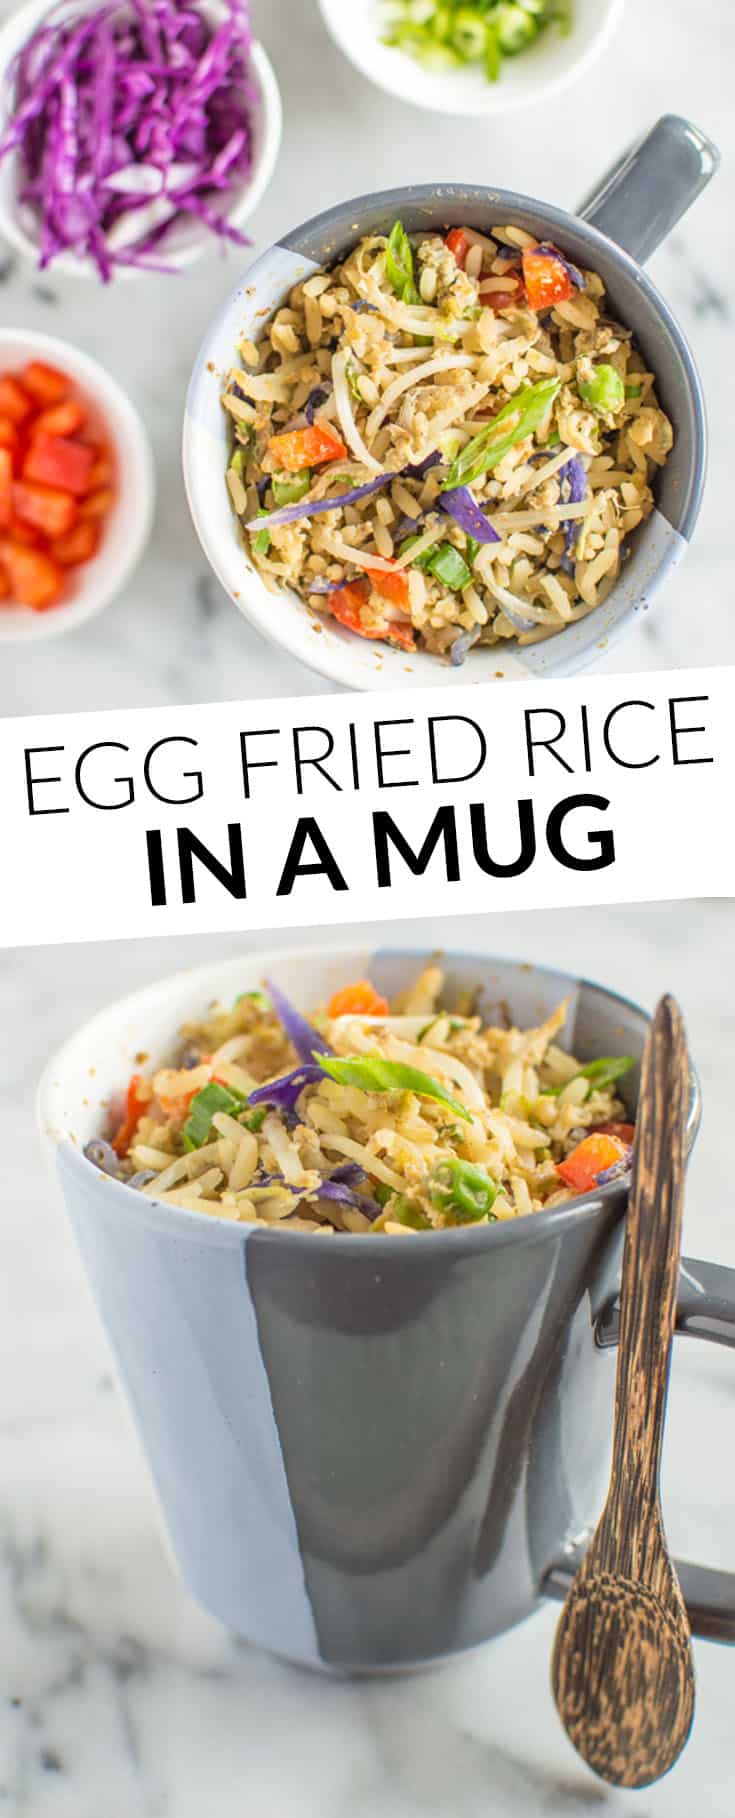 Egg Fried Rice In A Mug - easy meal in 10 minutes! @healthynibs